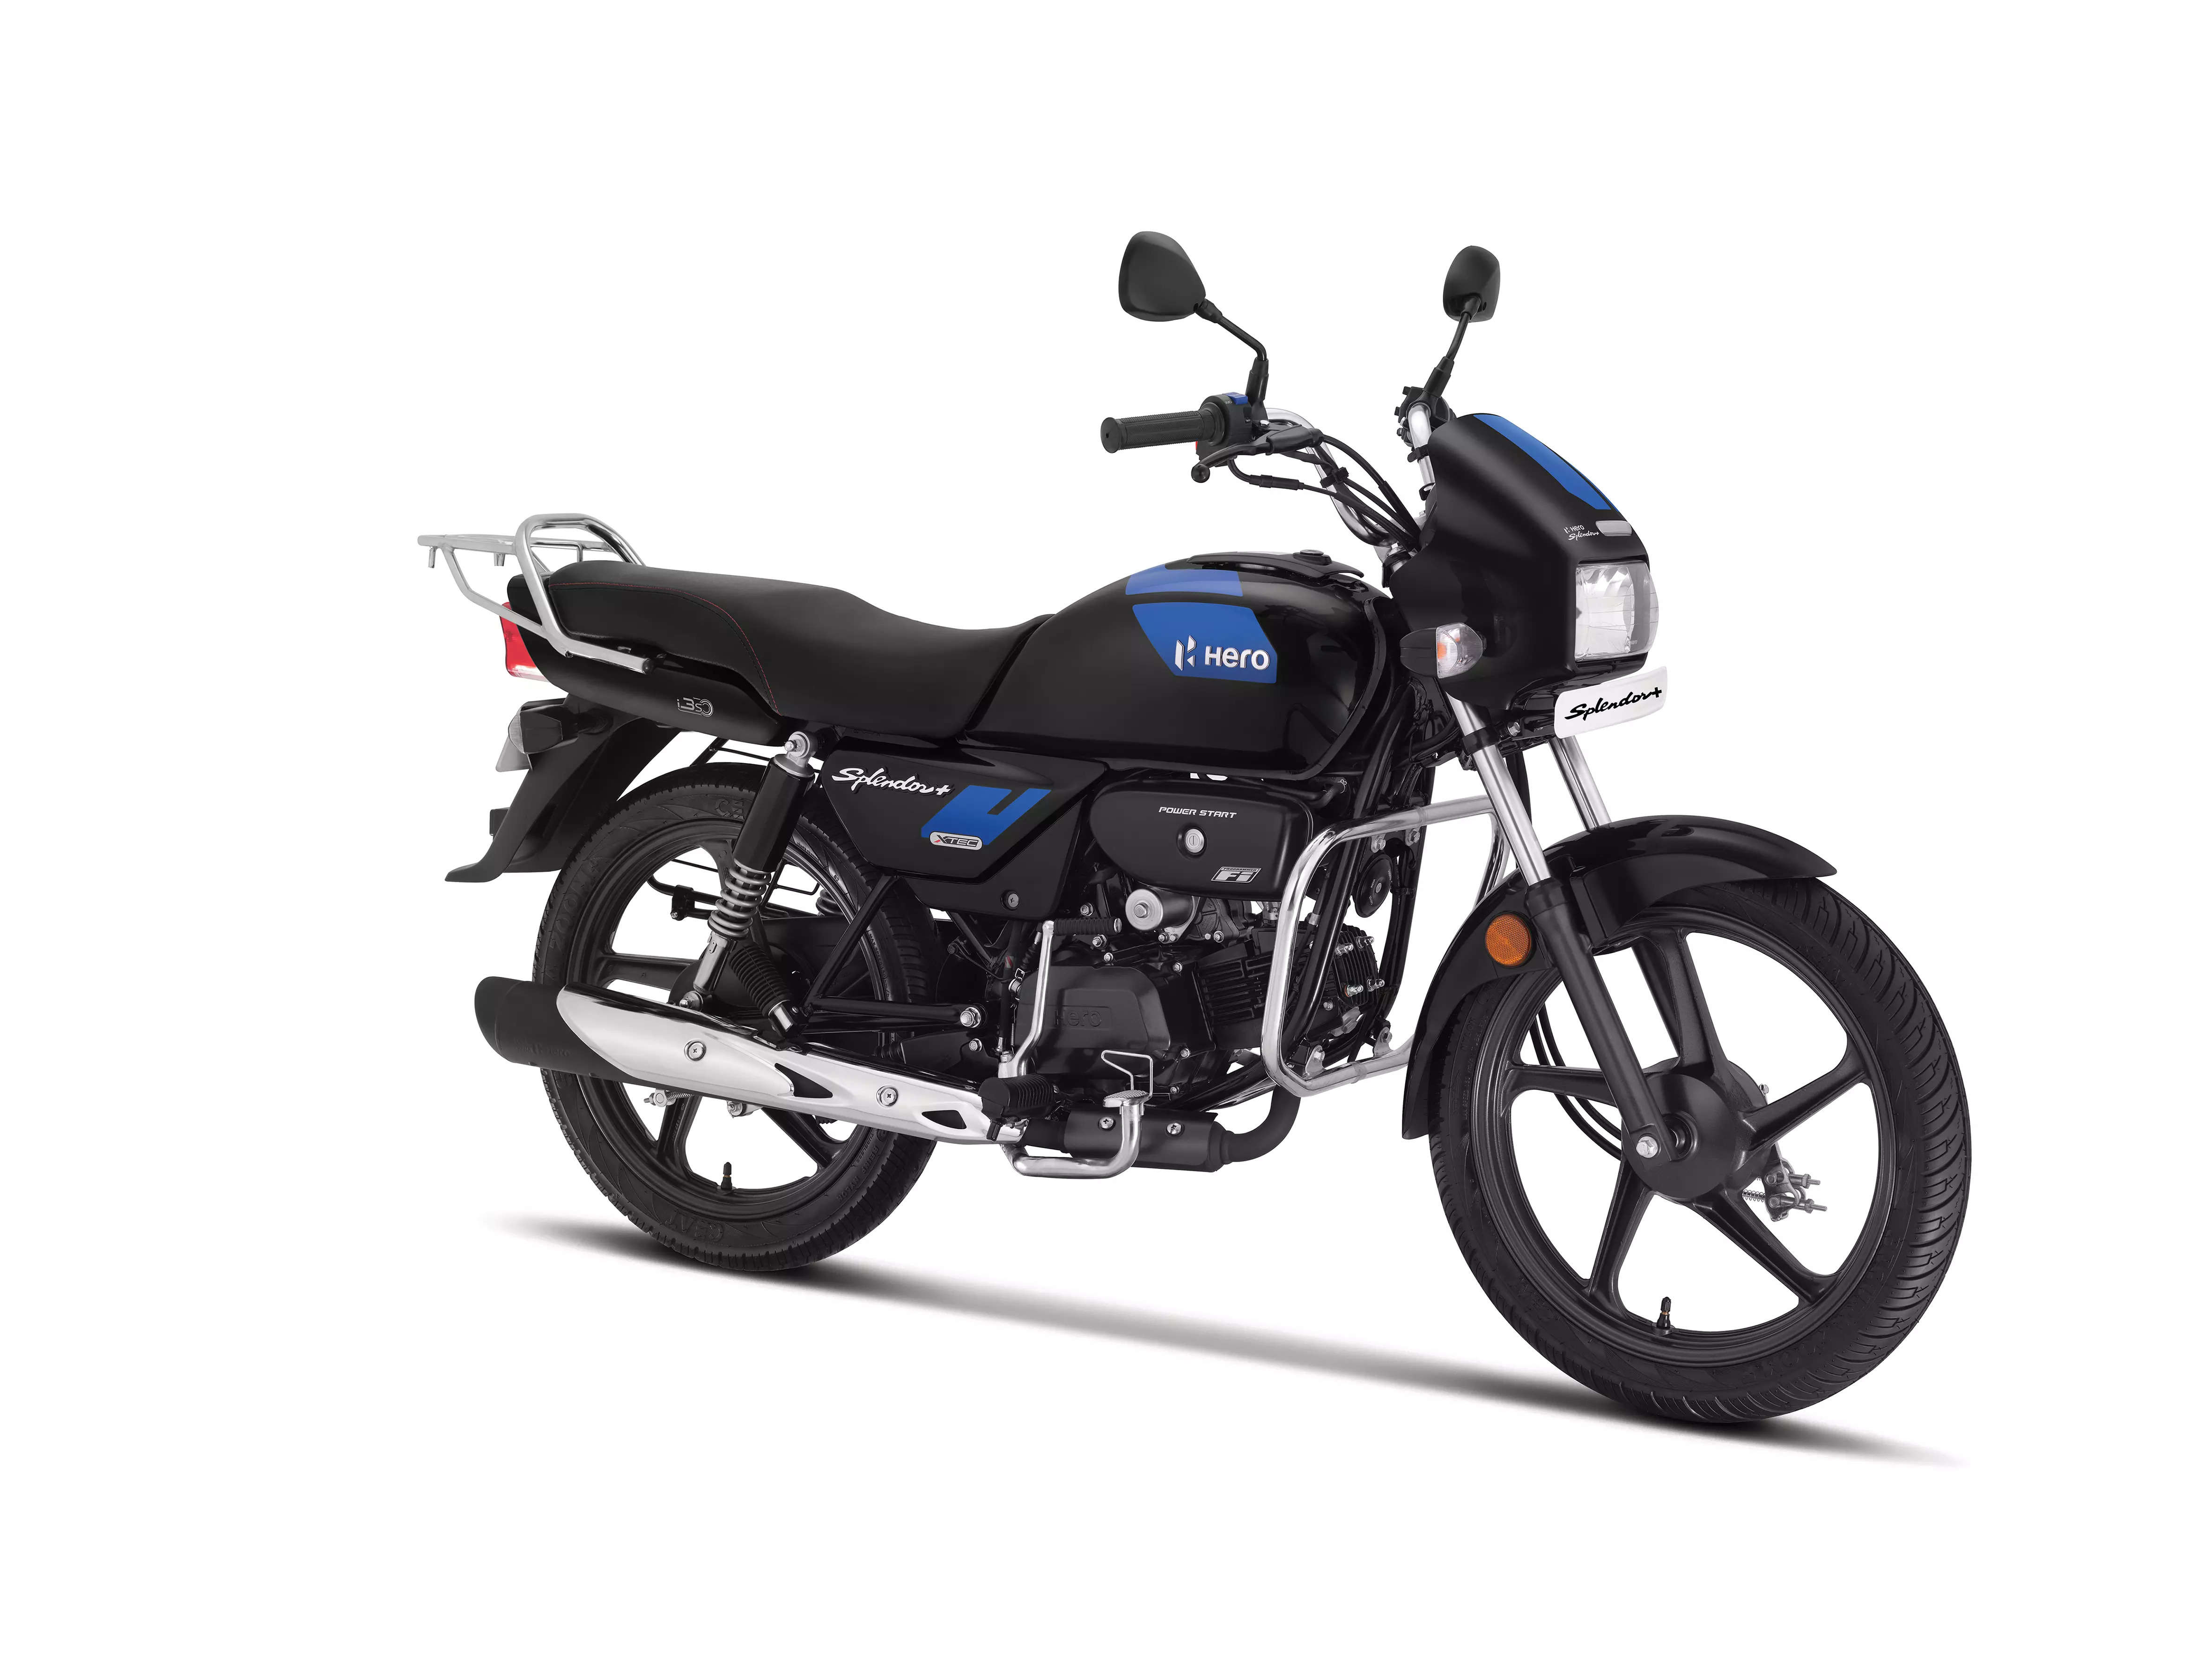 Hero Splendor+ XTEC Price: Hero Splendor+ XTEC launched at a price of Rs  72,900 | - Times of India